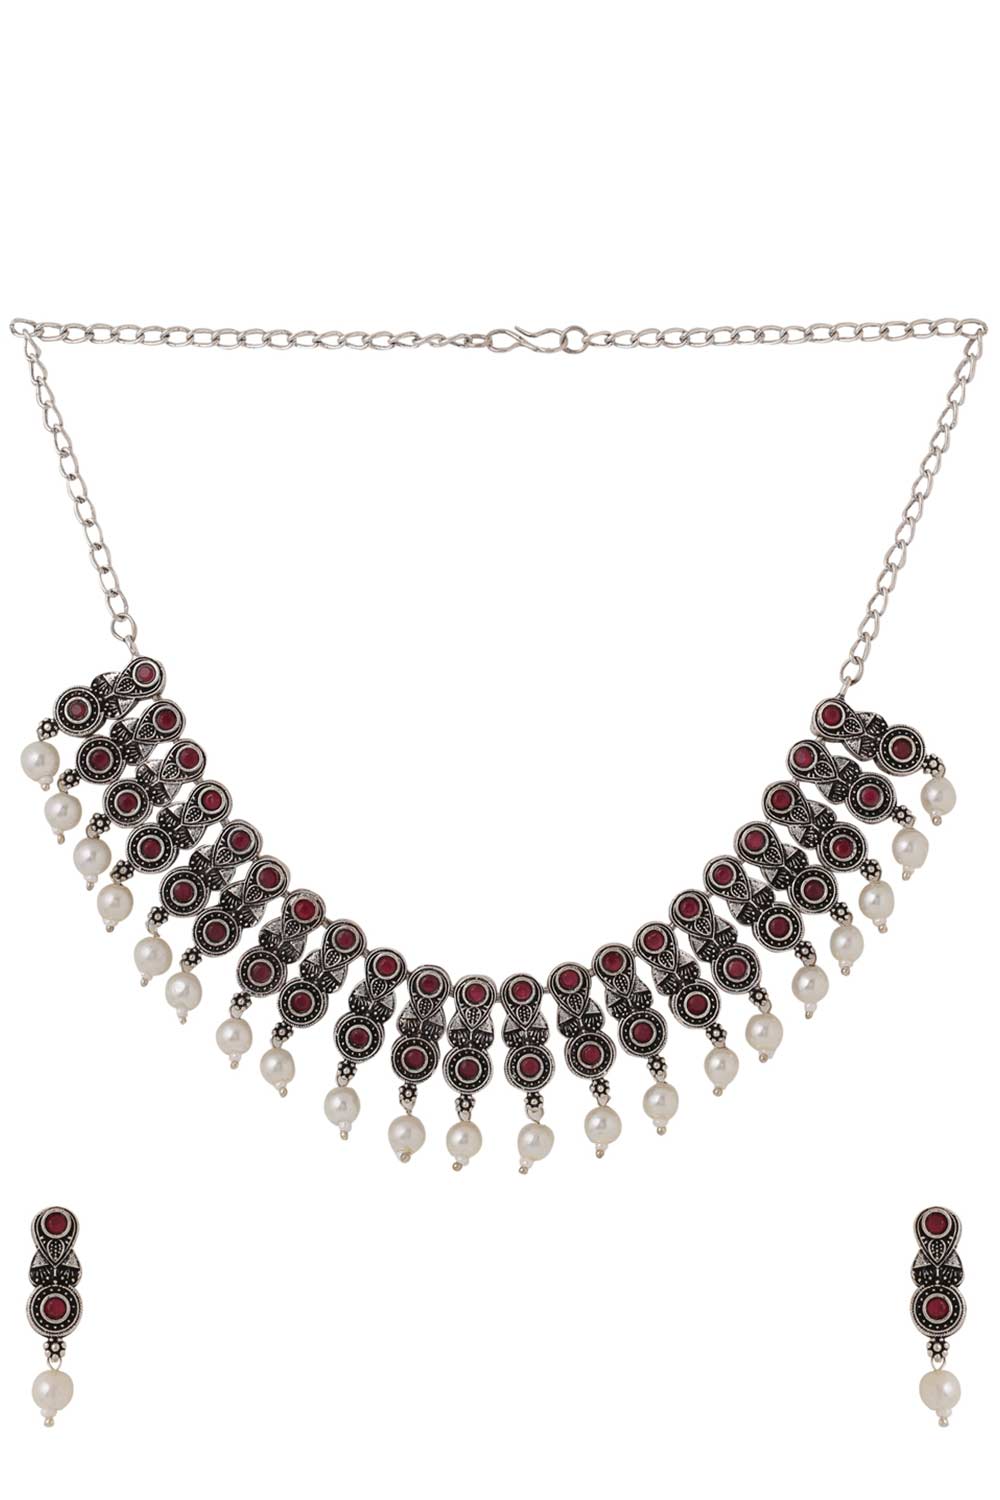 Buy Handcrafted Oxidised Pink Stone Studded Jewellery Set Online - Front